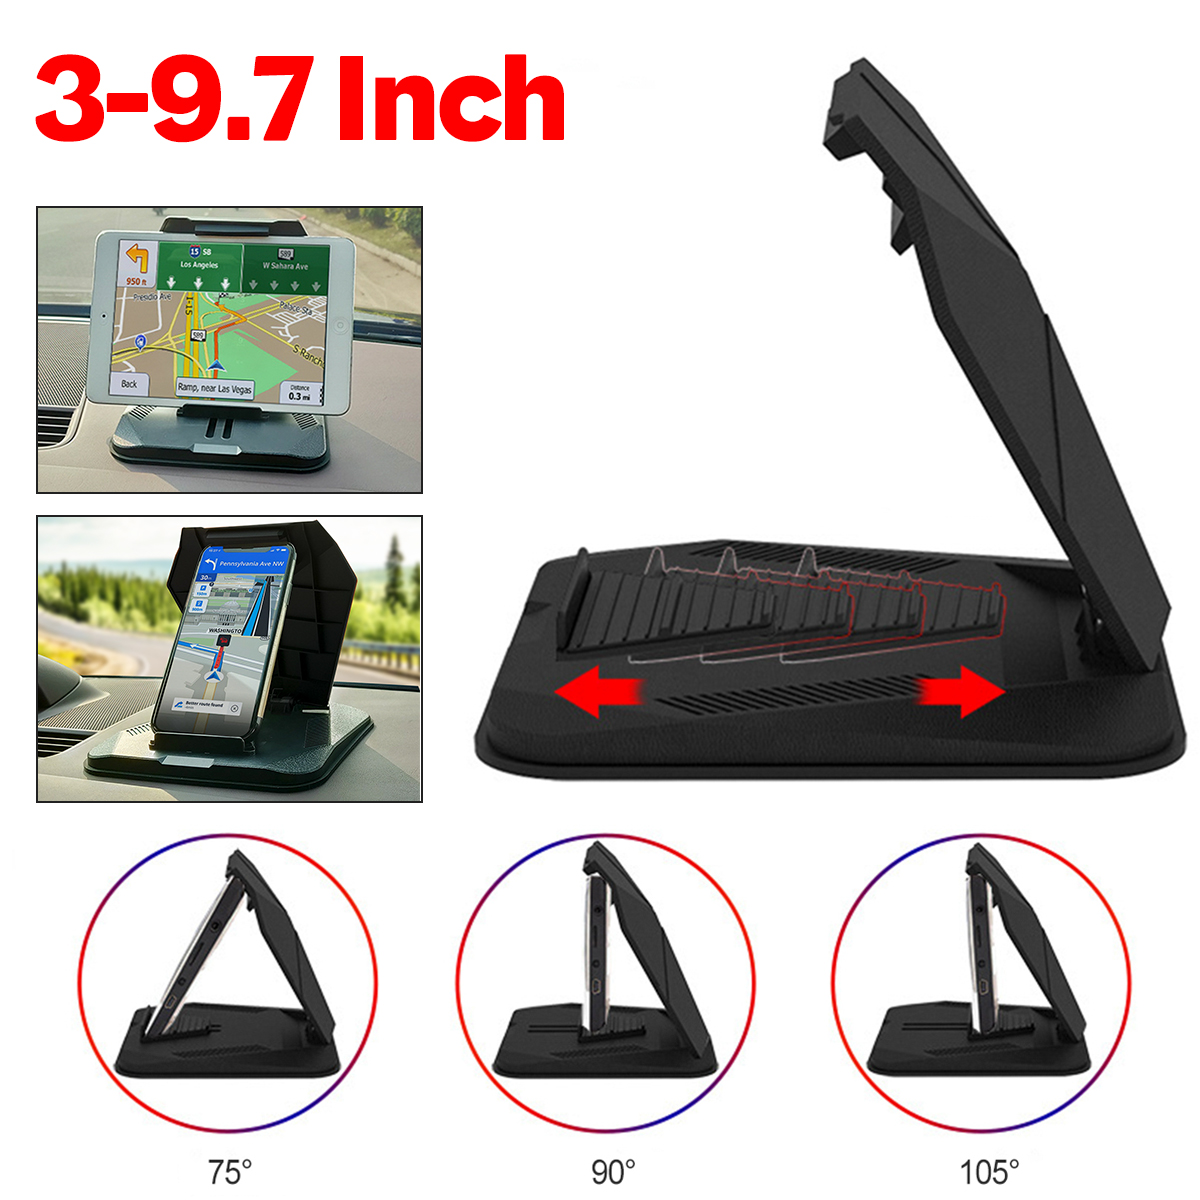 Foldable-Multifunctional-Car-Dashboard-Mount-Mobile-Phone-GPS-Holder-Stand-for-30-97-inch-Devices-1791089-1